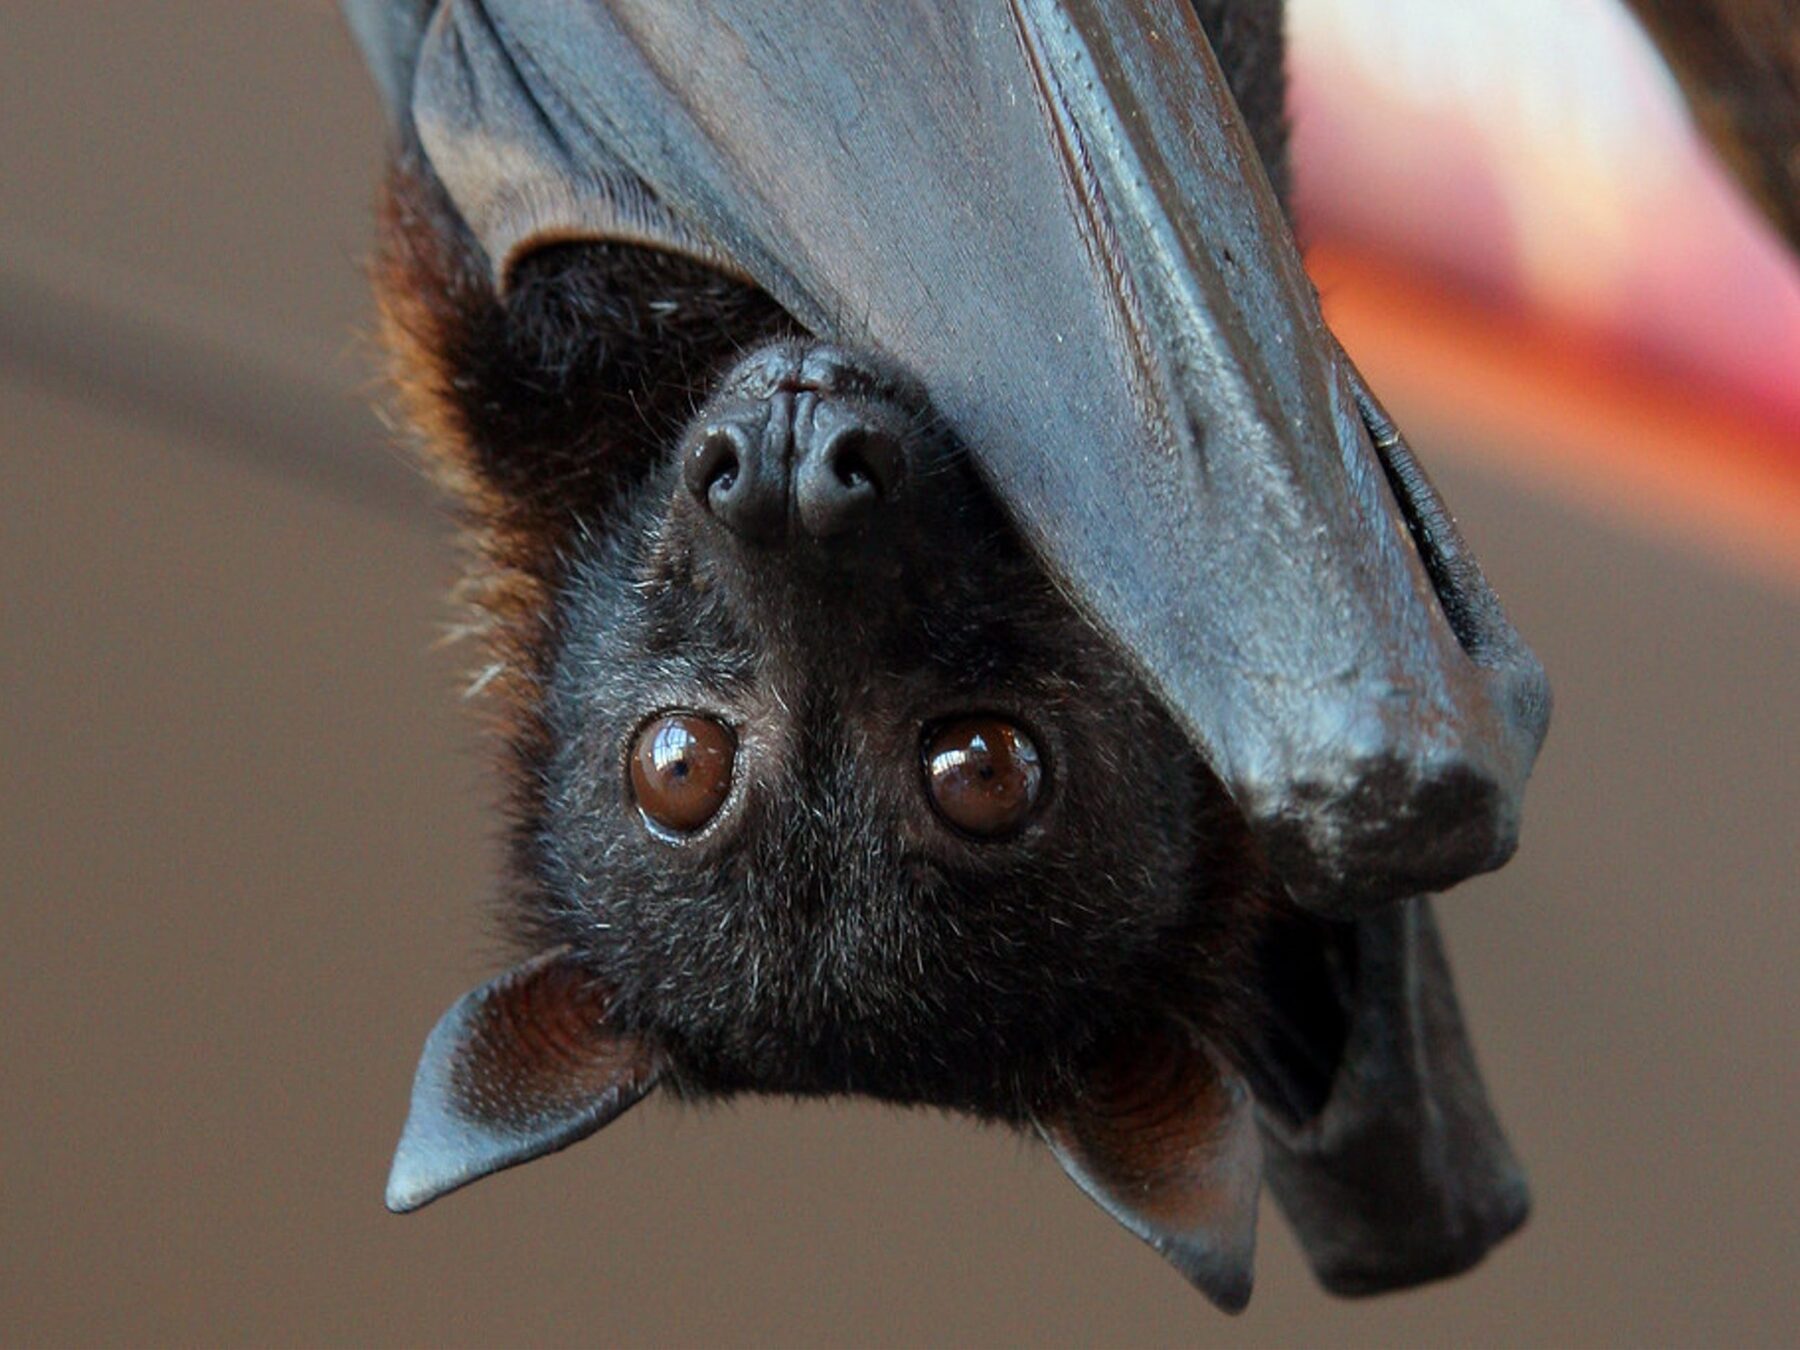 8-facts-about-international-bat-appreciation-day-april-17th